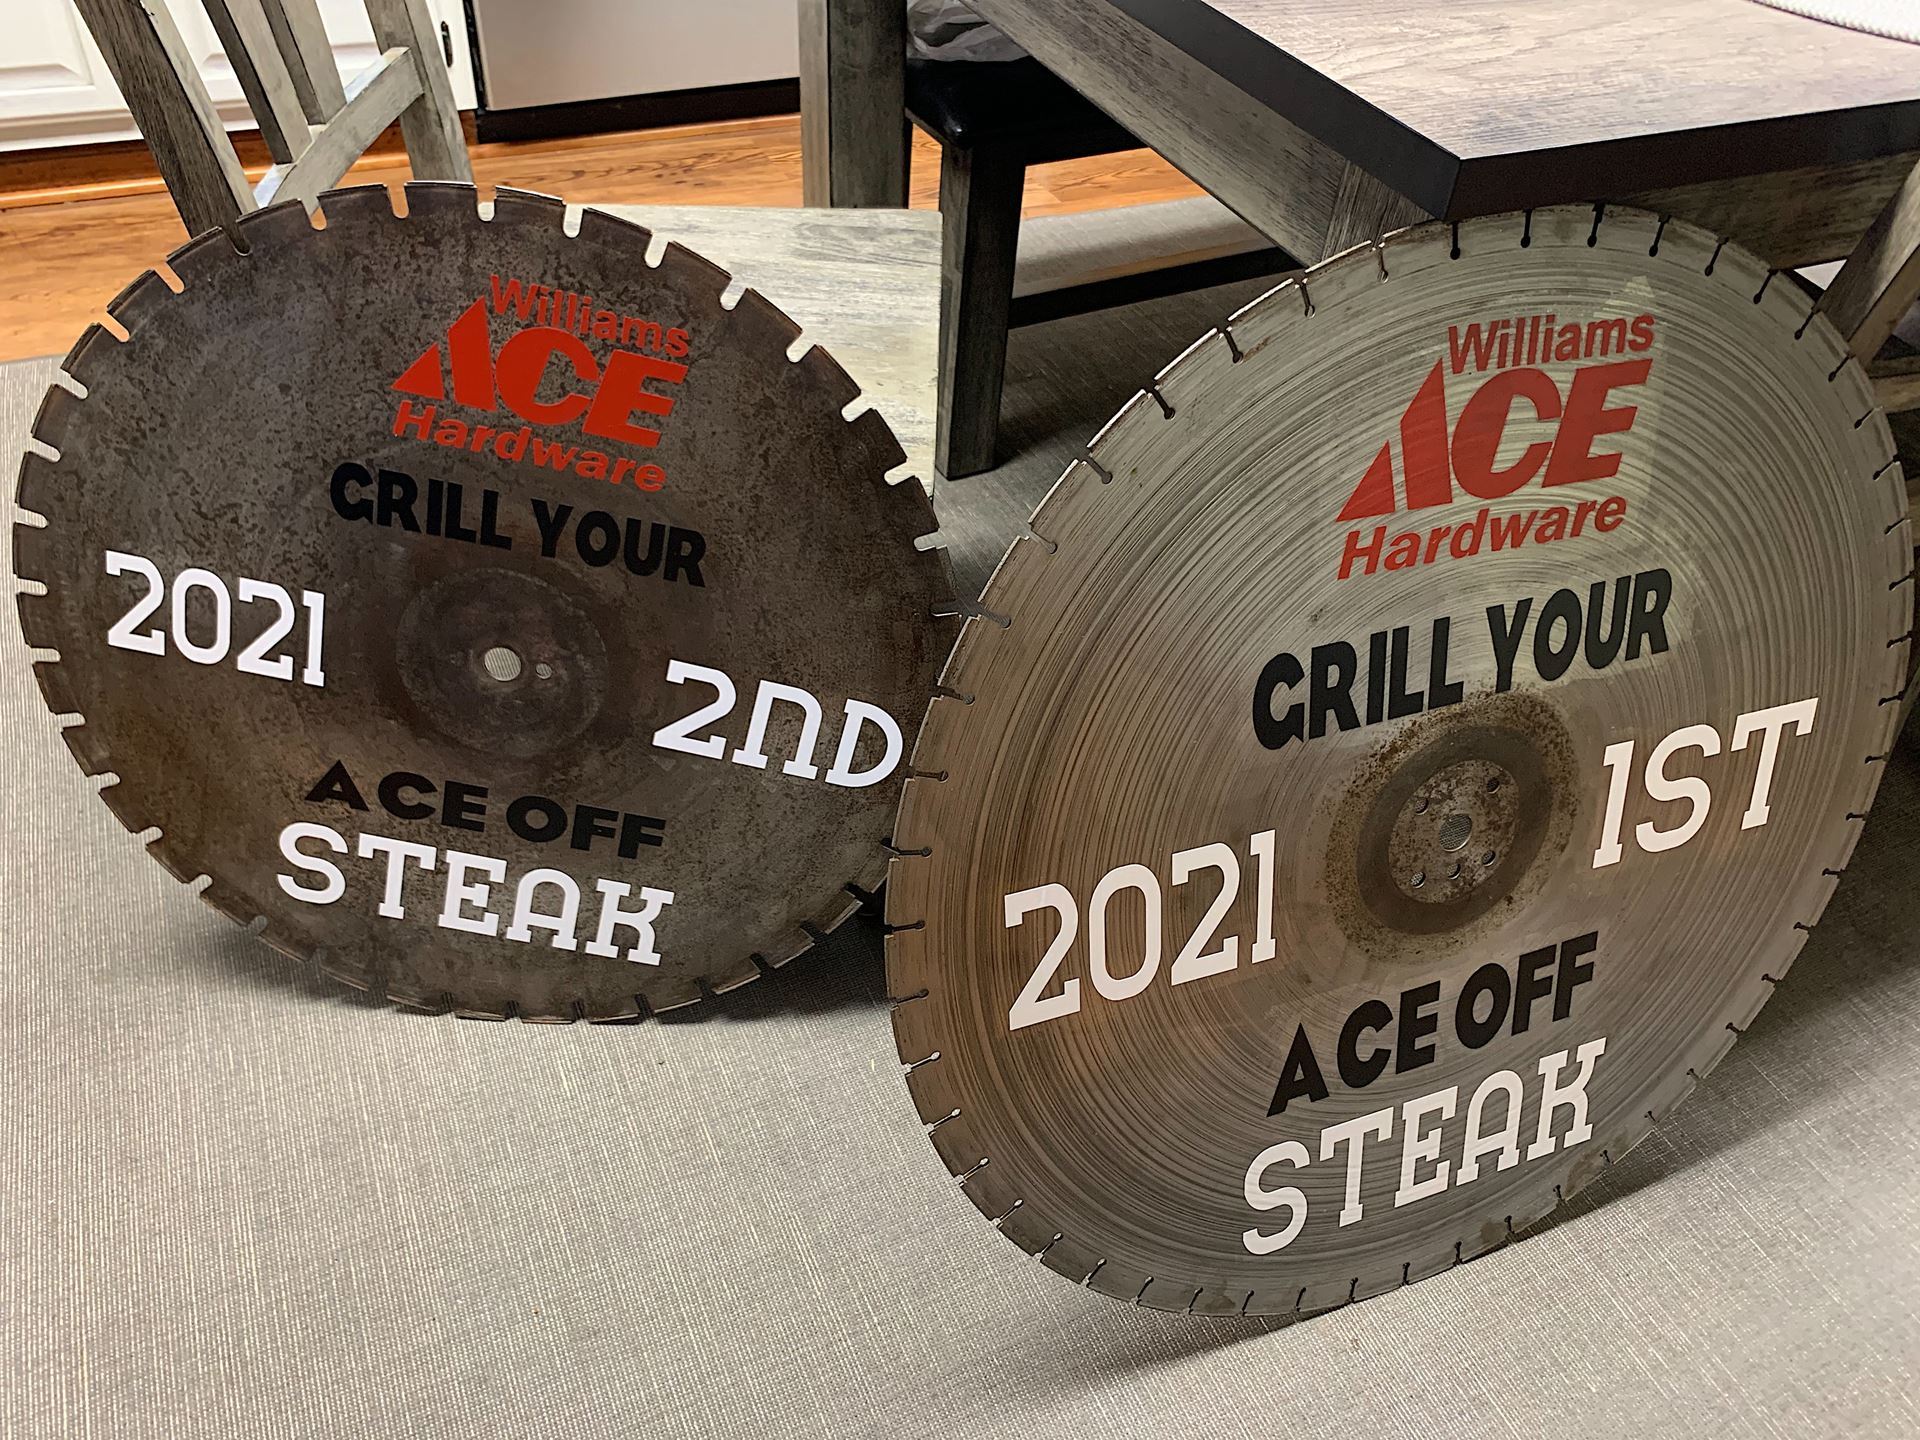 Grill Your Ace Off Saw Blade Trophy 2021